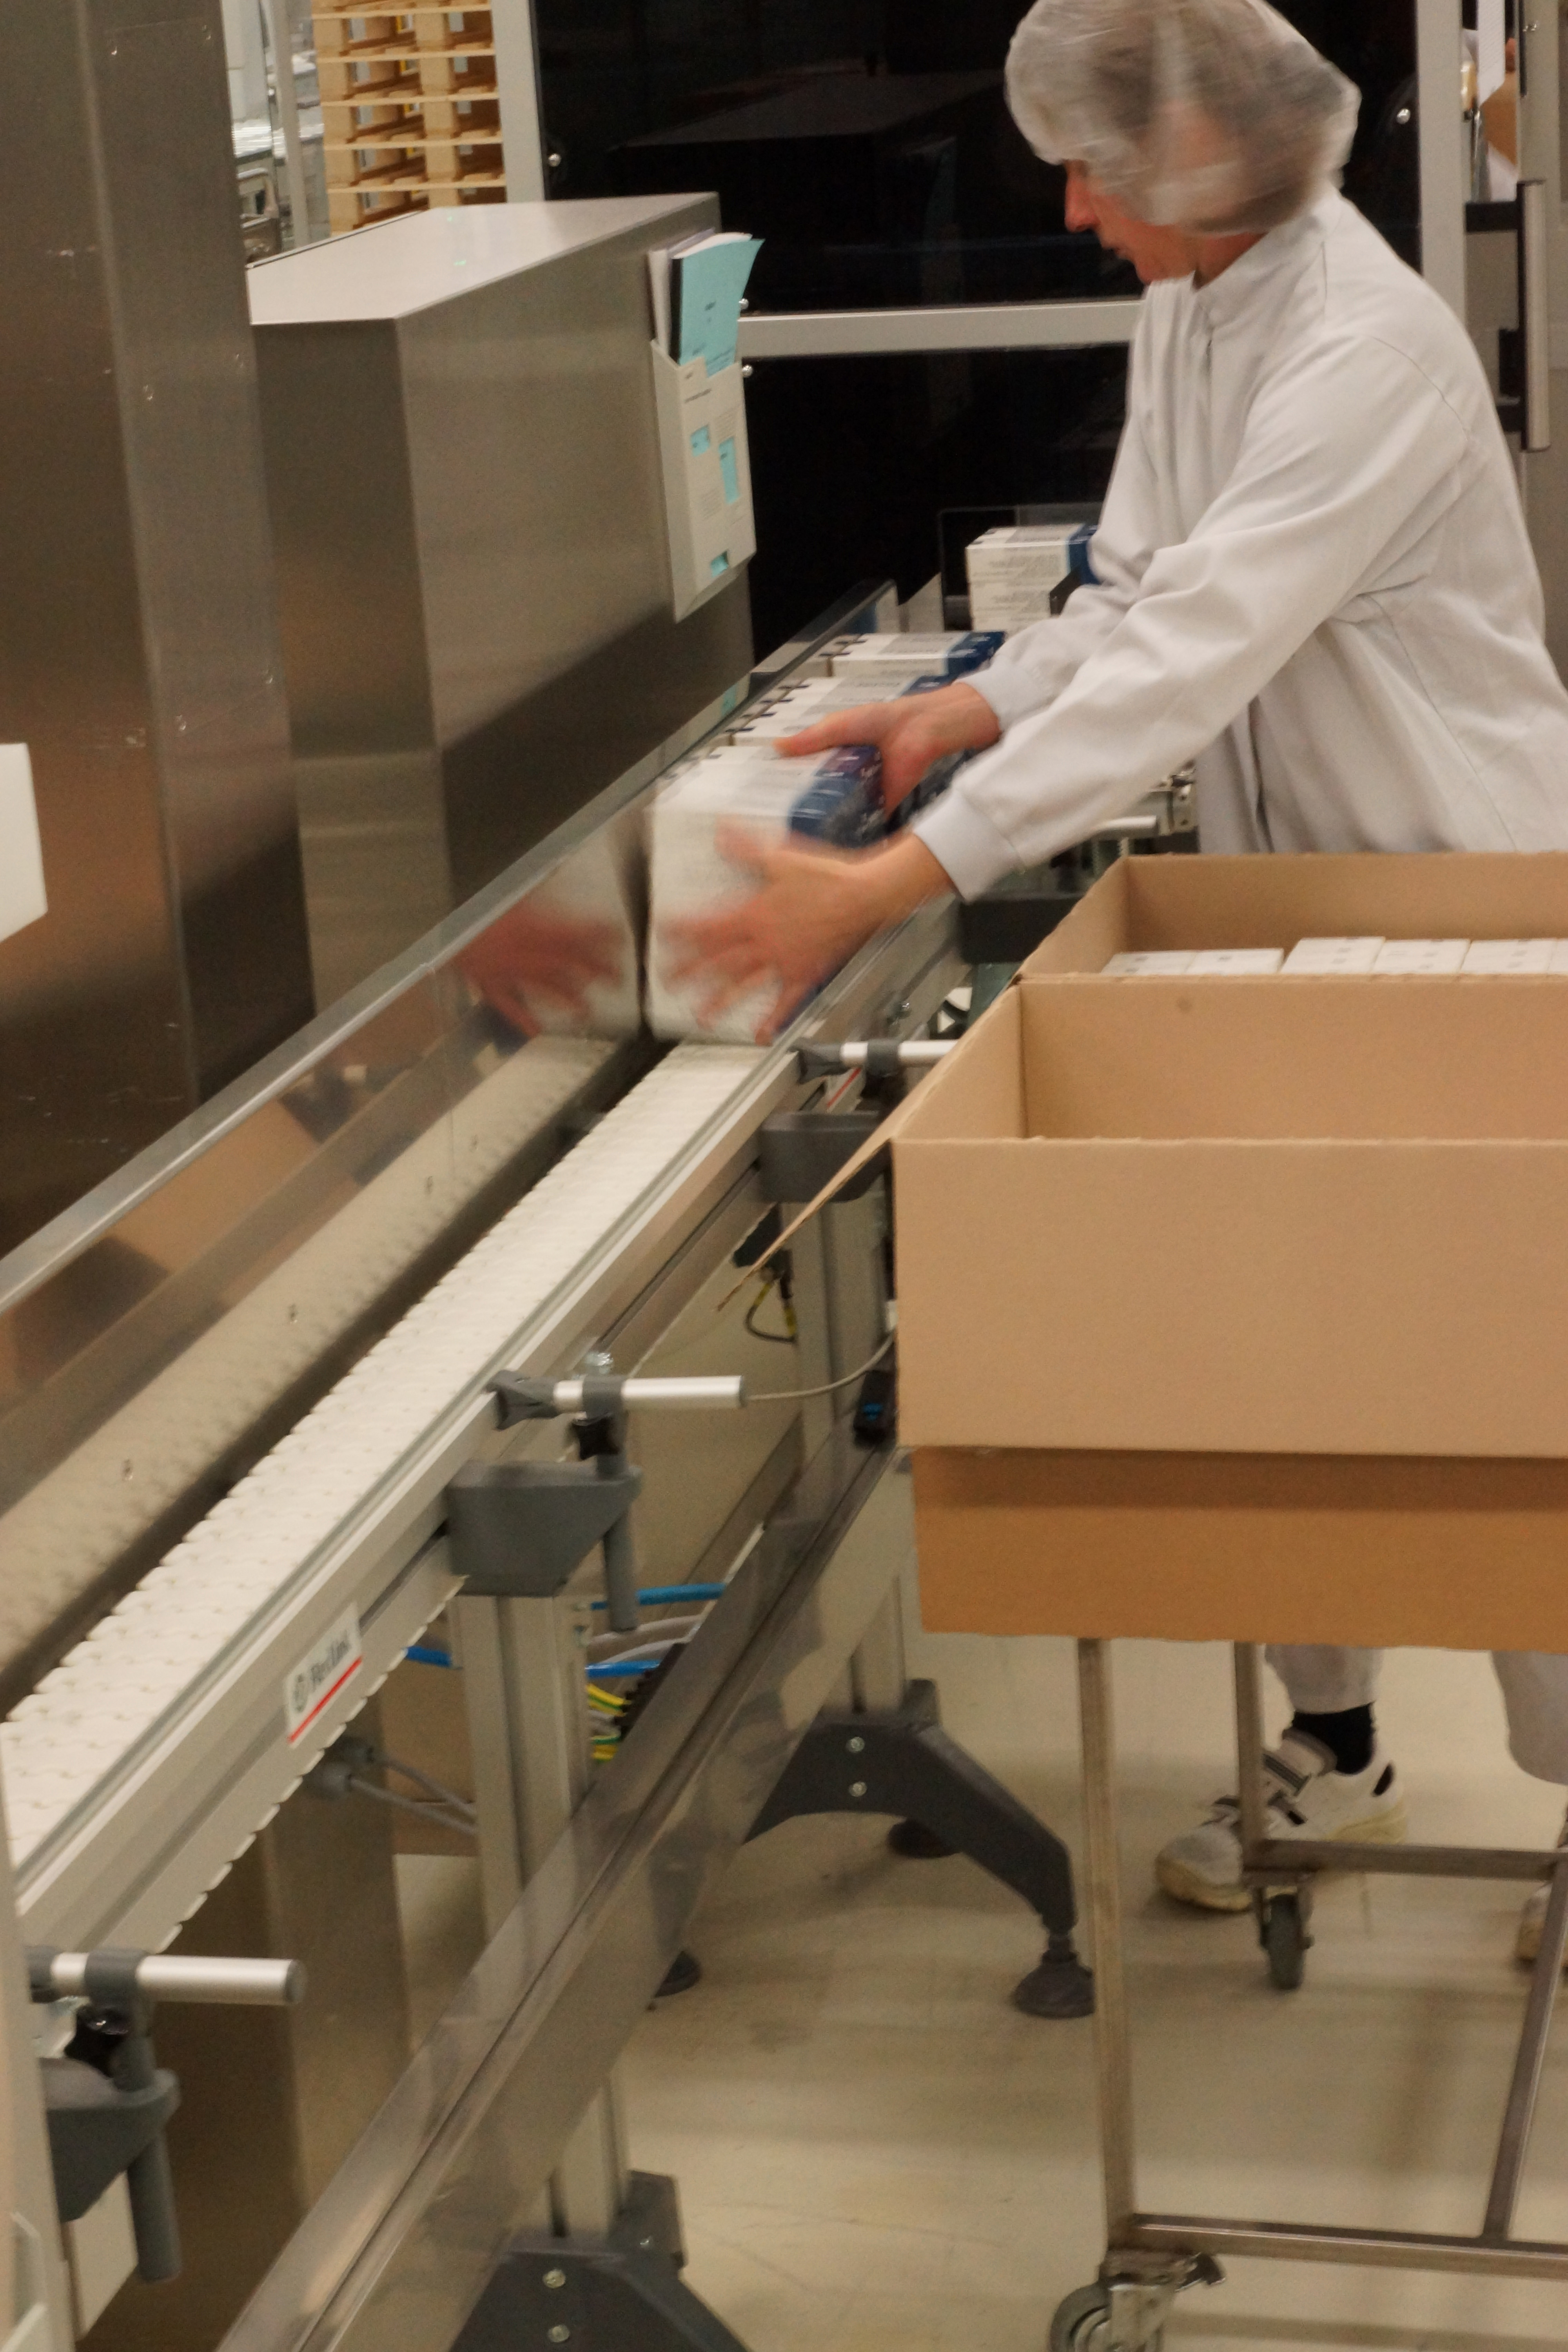 Using product inspection for quality control in liquid medicines